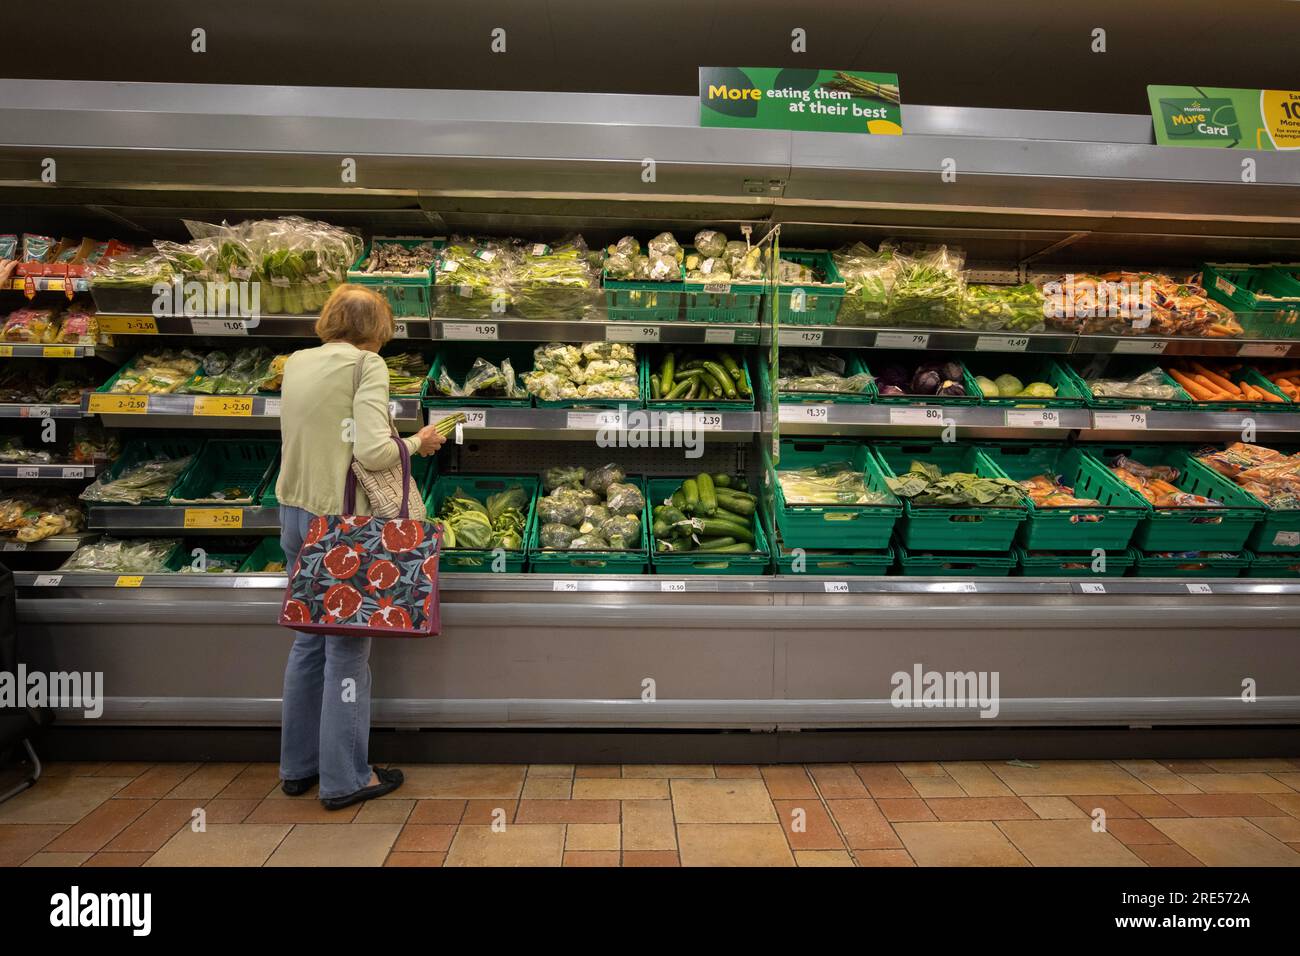 A woman shops for vegetables at a Morrisons supermarket as food prices continue to rise due to the highest inflation rates in the UK since the 1970's. Stock Photo